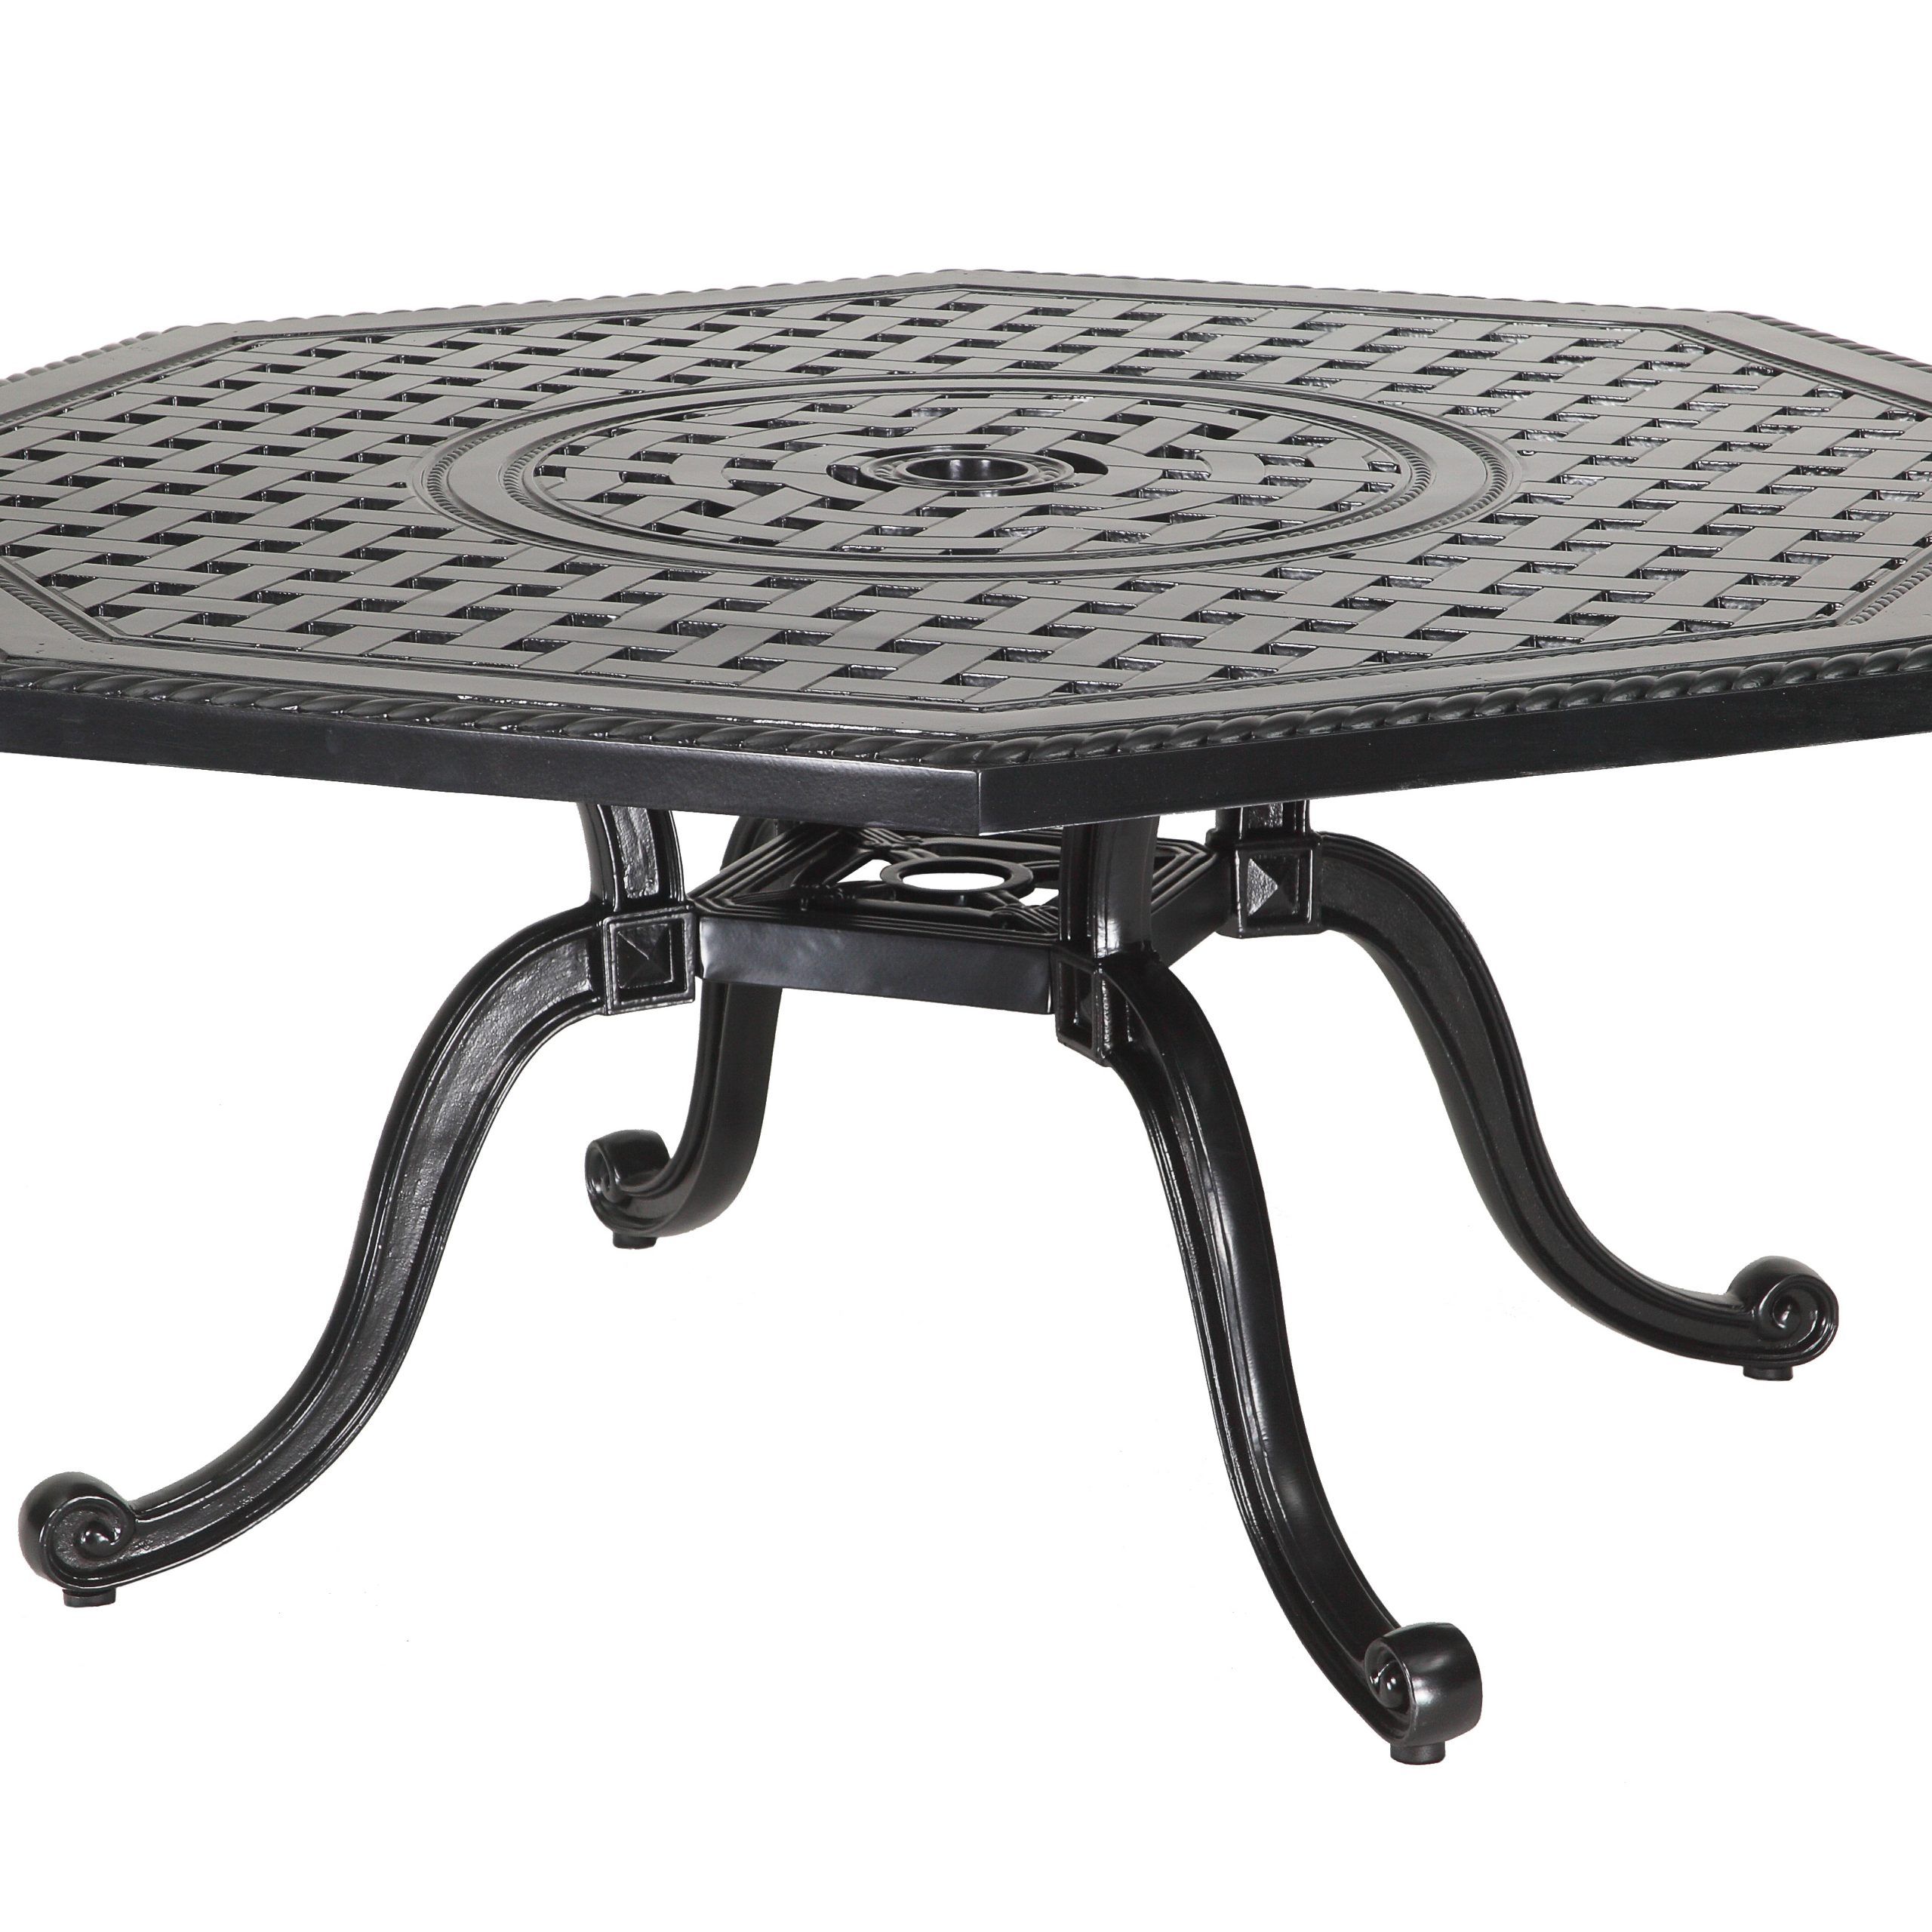 Gensun Grand Terrace Cast Aluminum 45'' Wide Octagon Chat Intended For Octagon Console Tables (View 13 of 20)